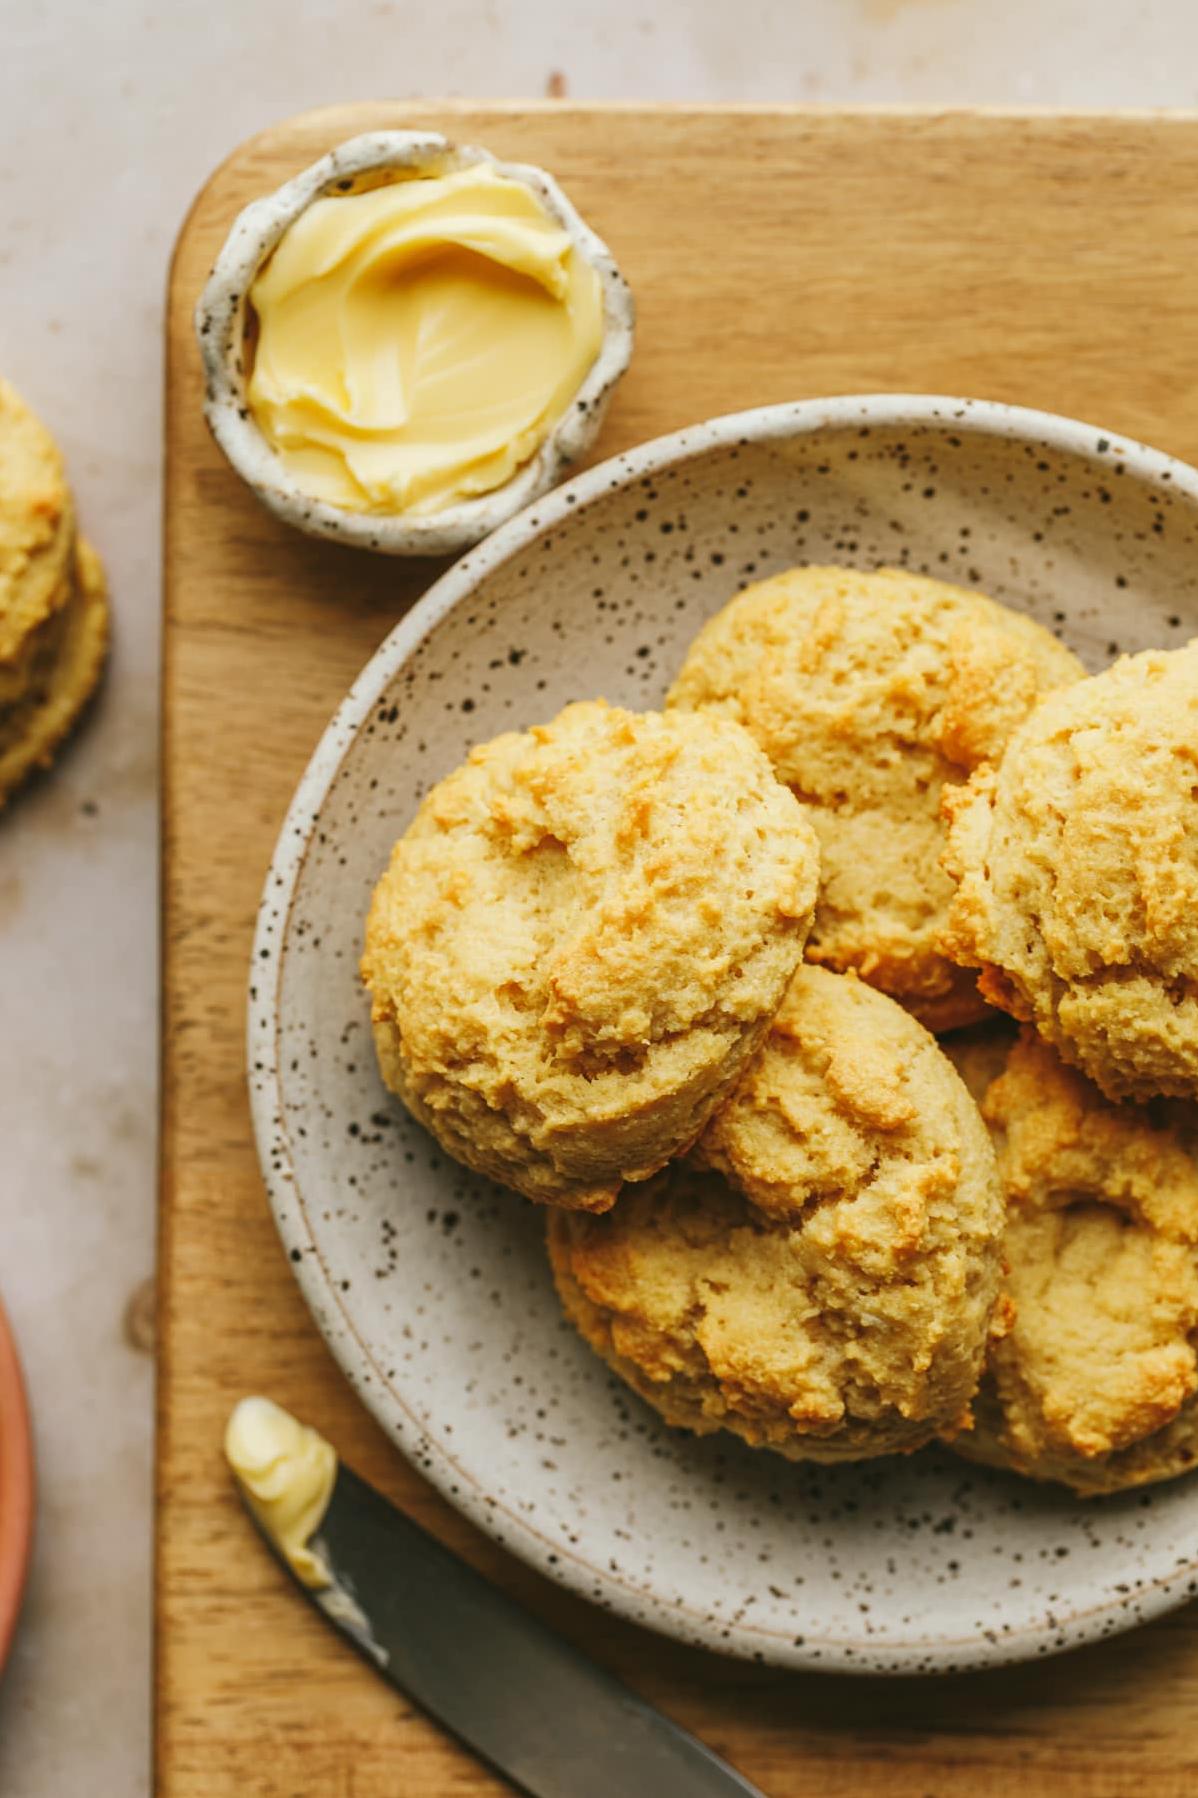  Perfect for a lazy weekend morning, serve these biscuits with your favorite coffee.